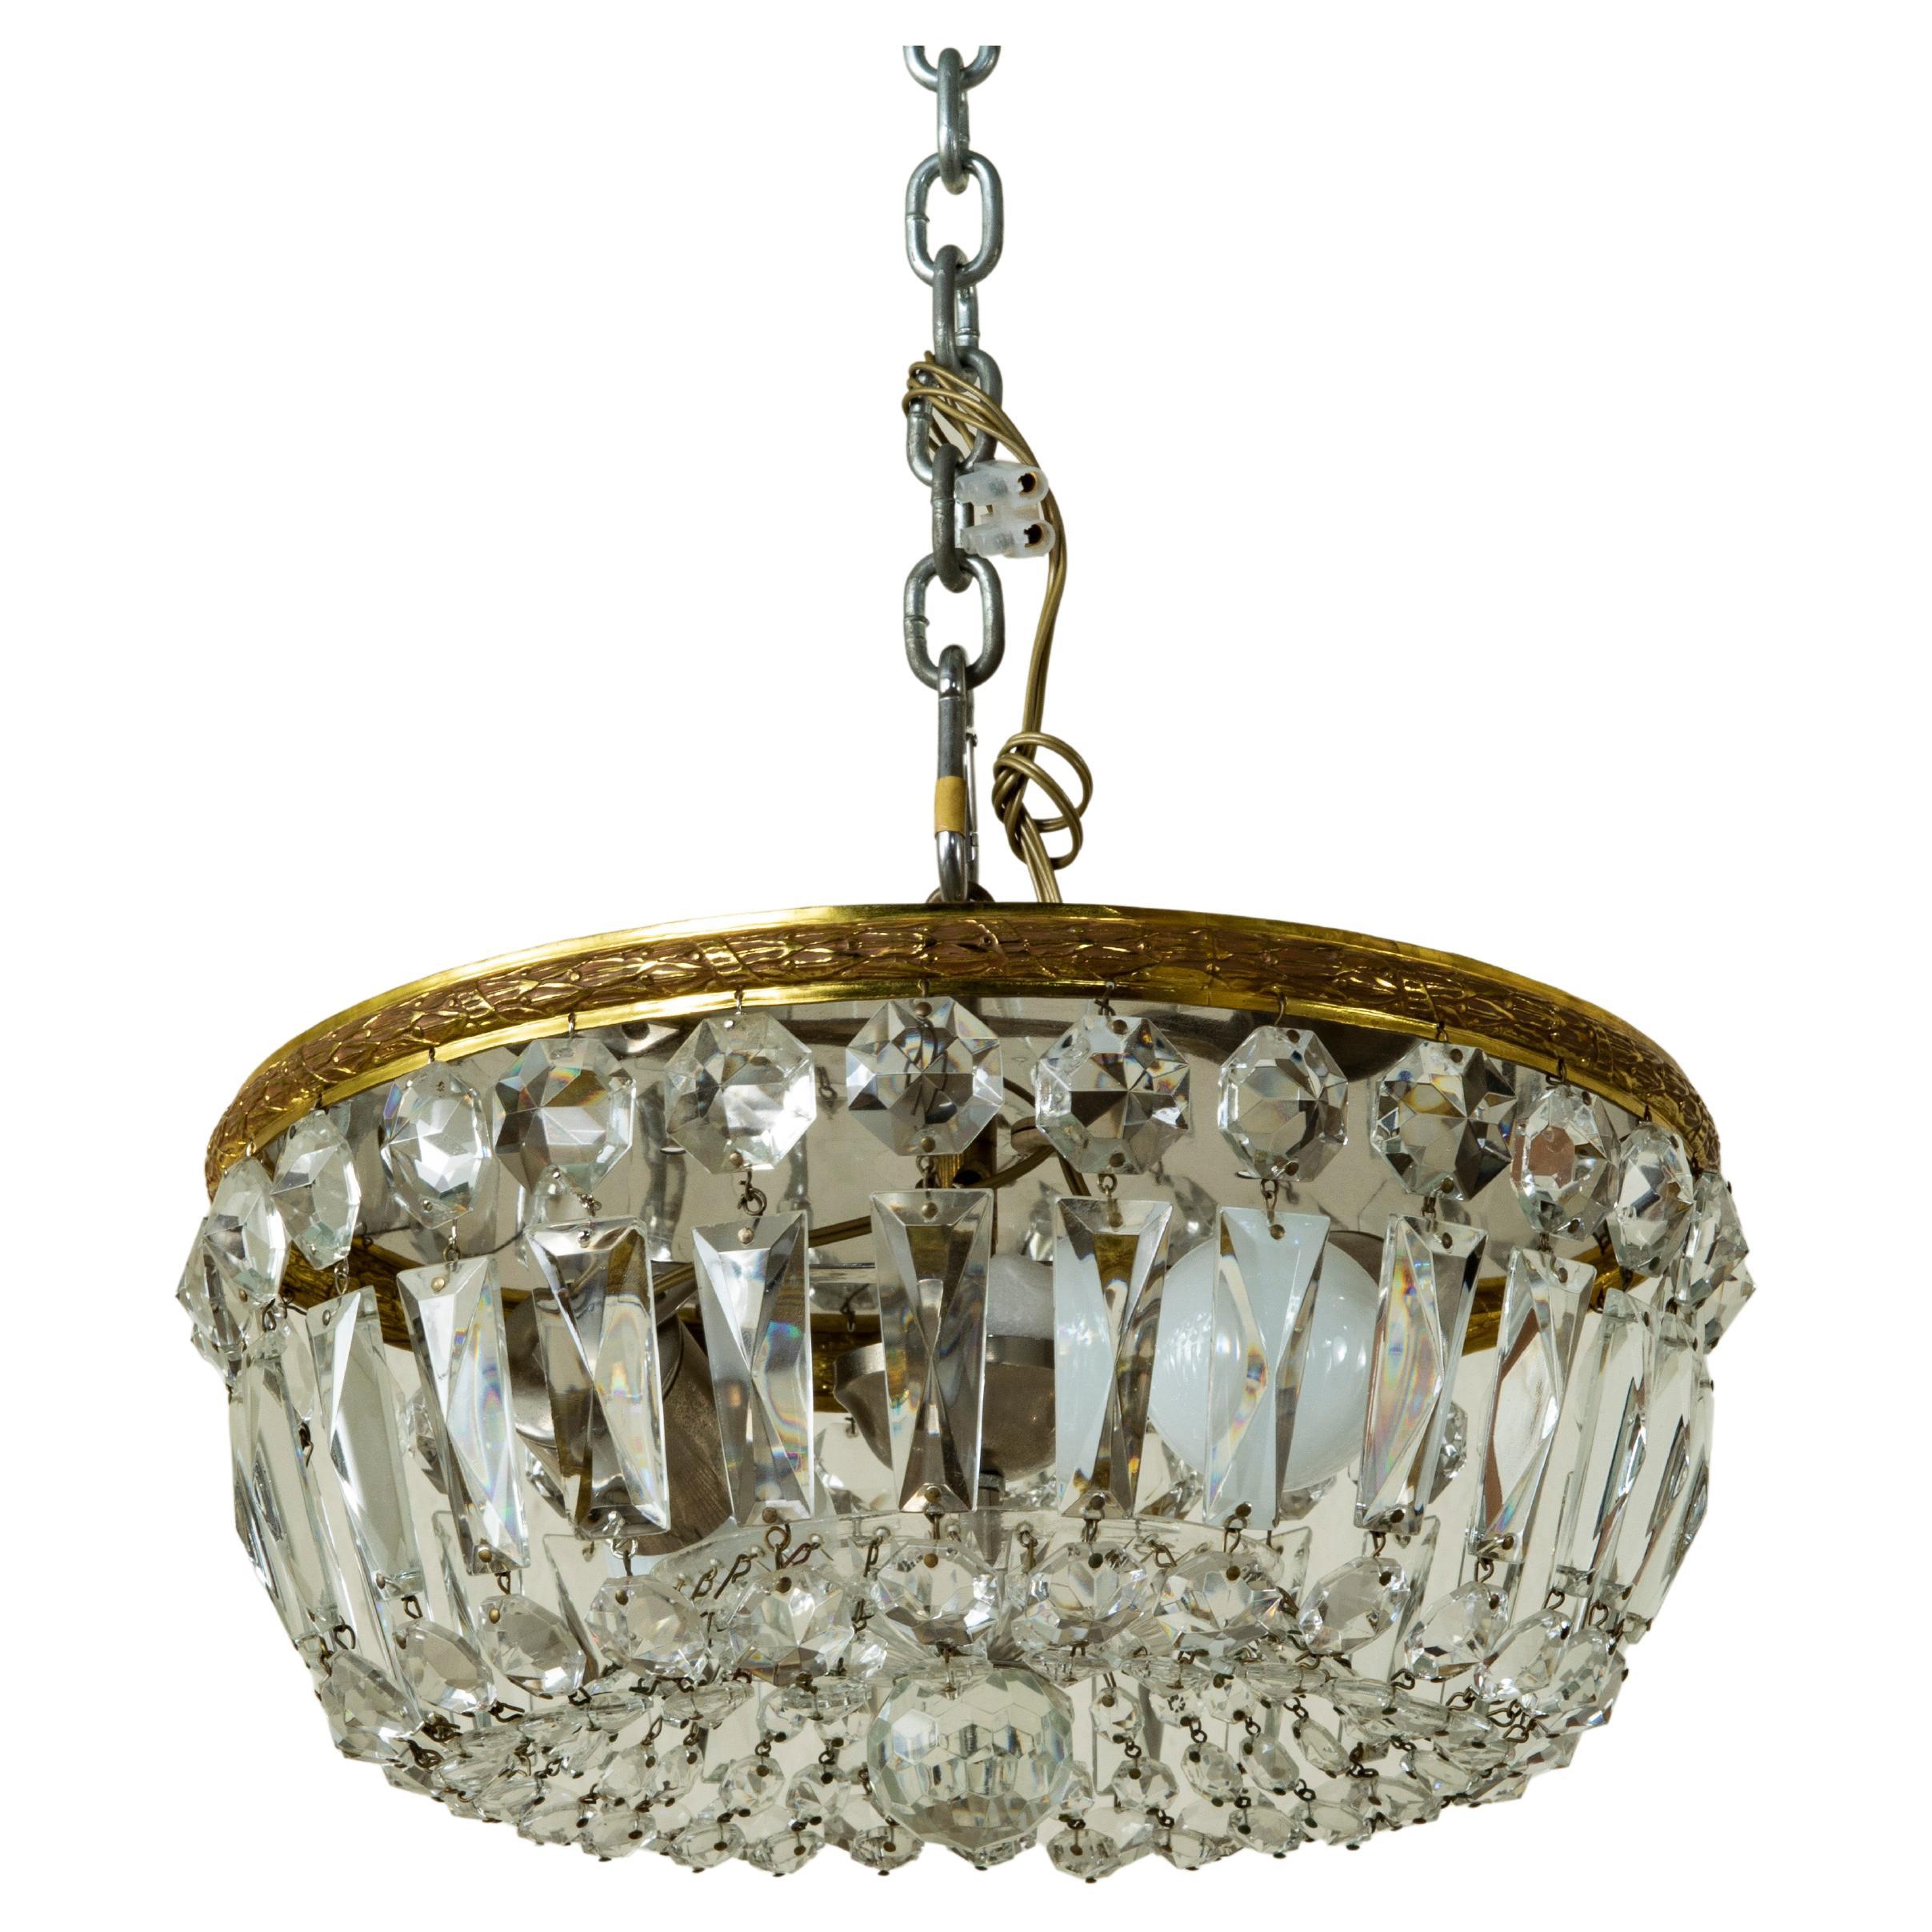 Early 20th Century French Bronze and Crystal Flush Mount, Chandelier, Pendant